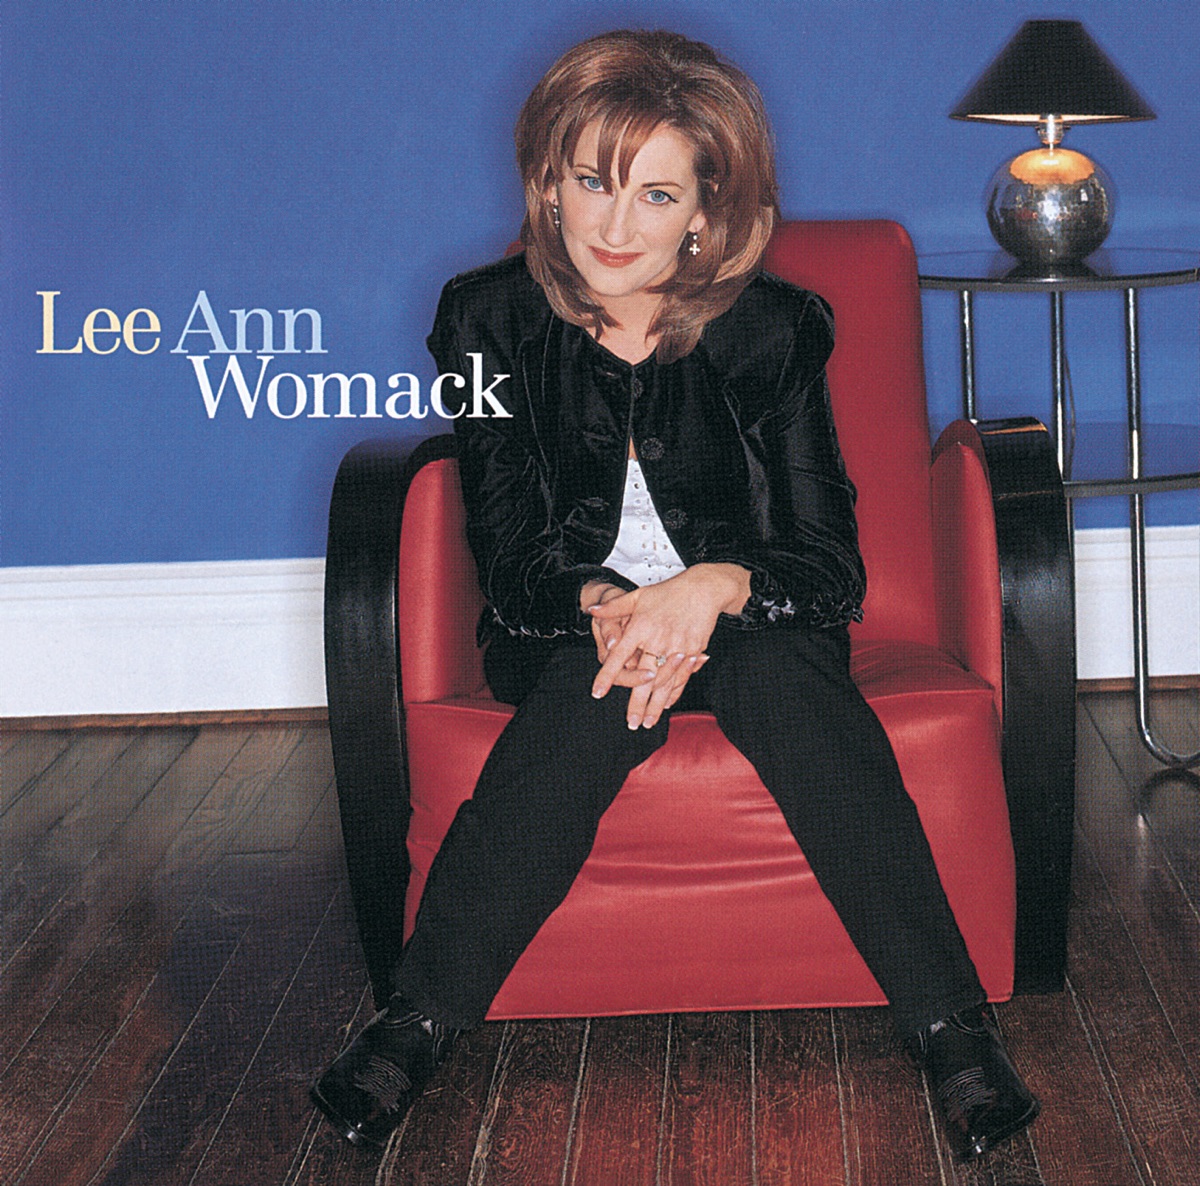 I Hope You Dance by Lee Ann Womack on Apple Music